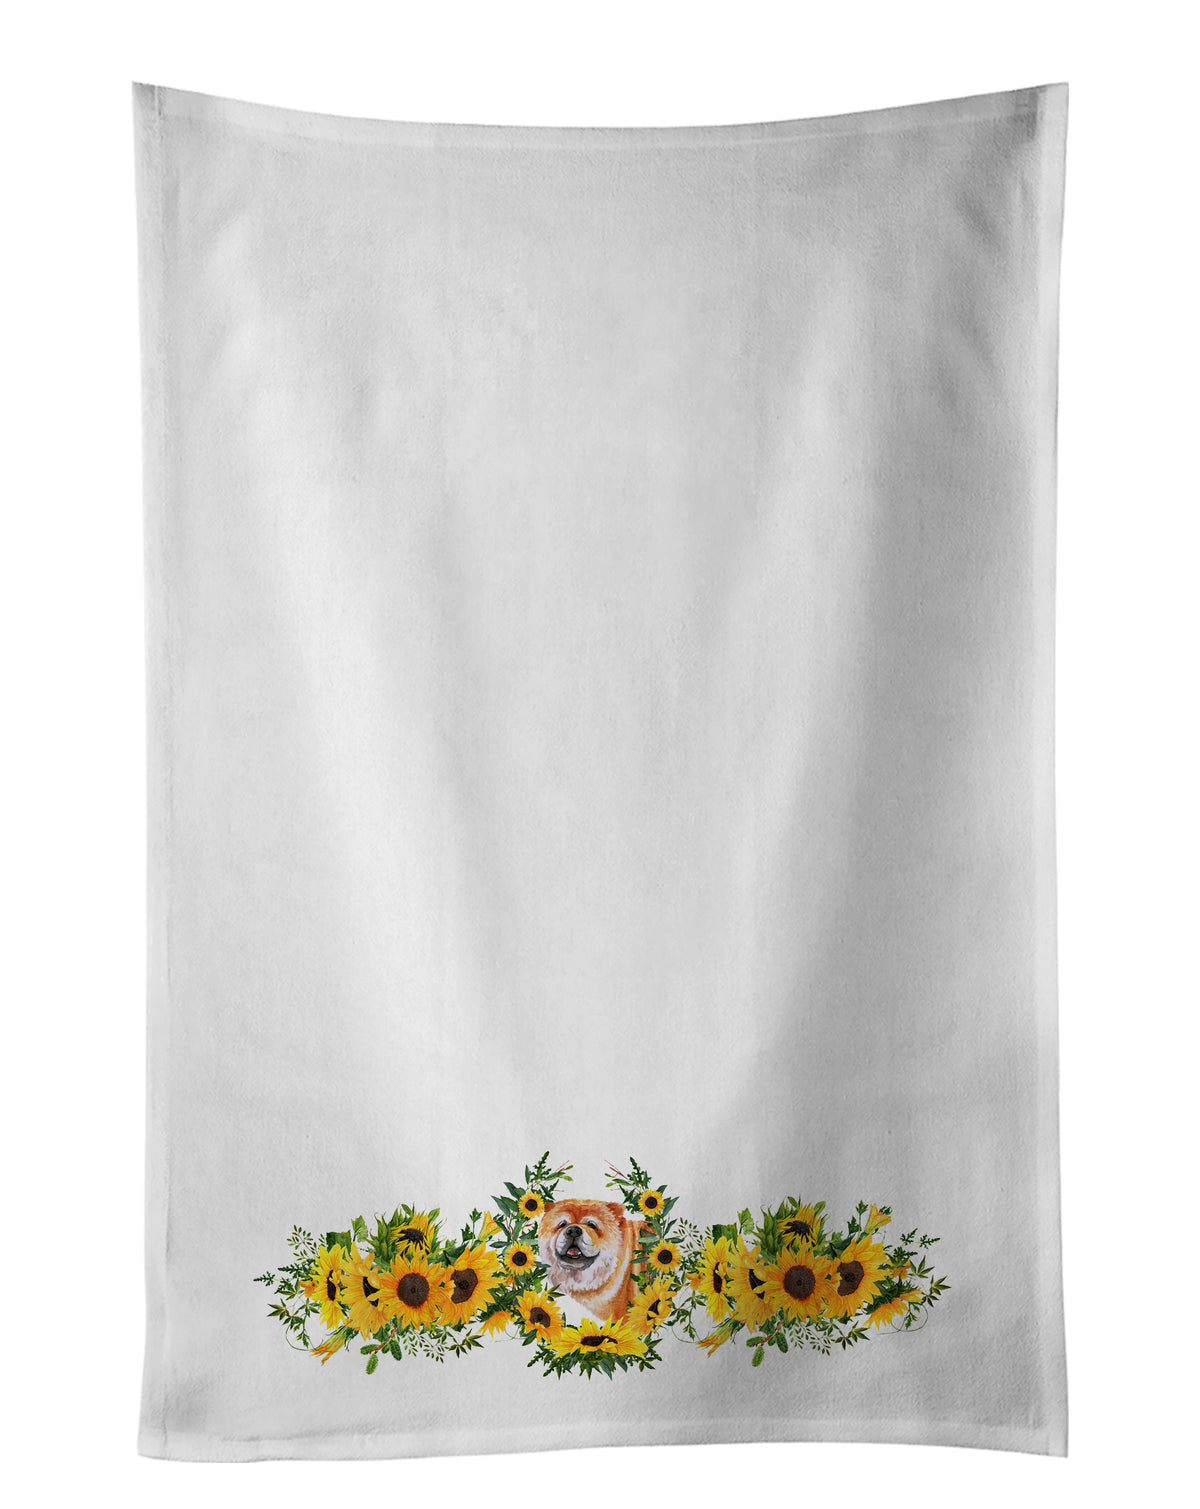 Buy this Chow Chow in Sunflowers White Kitchen Towel Set of 2